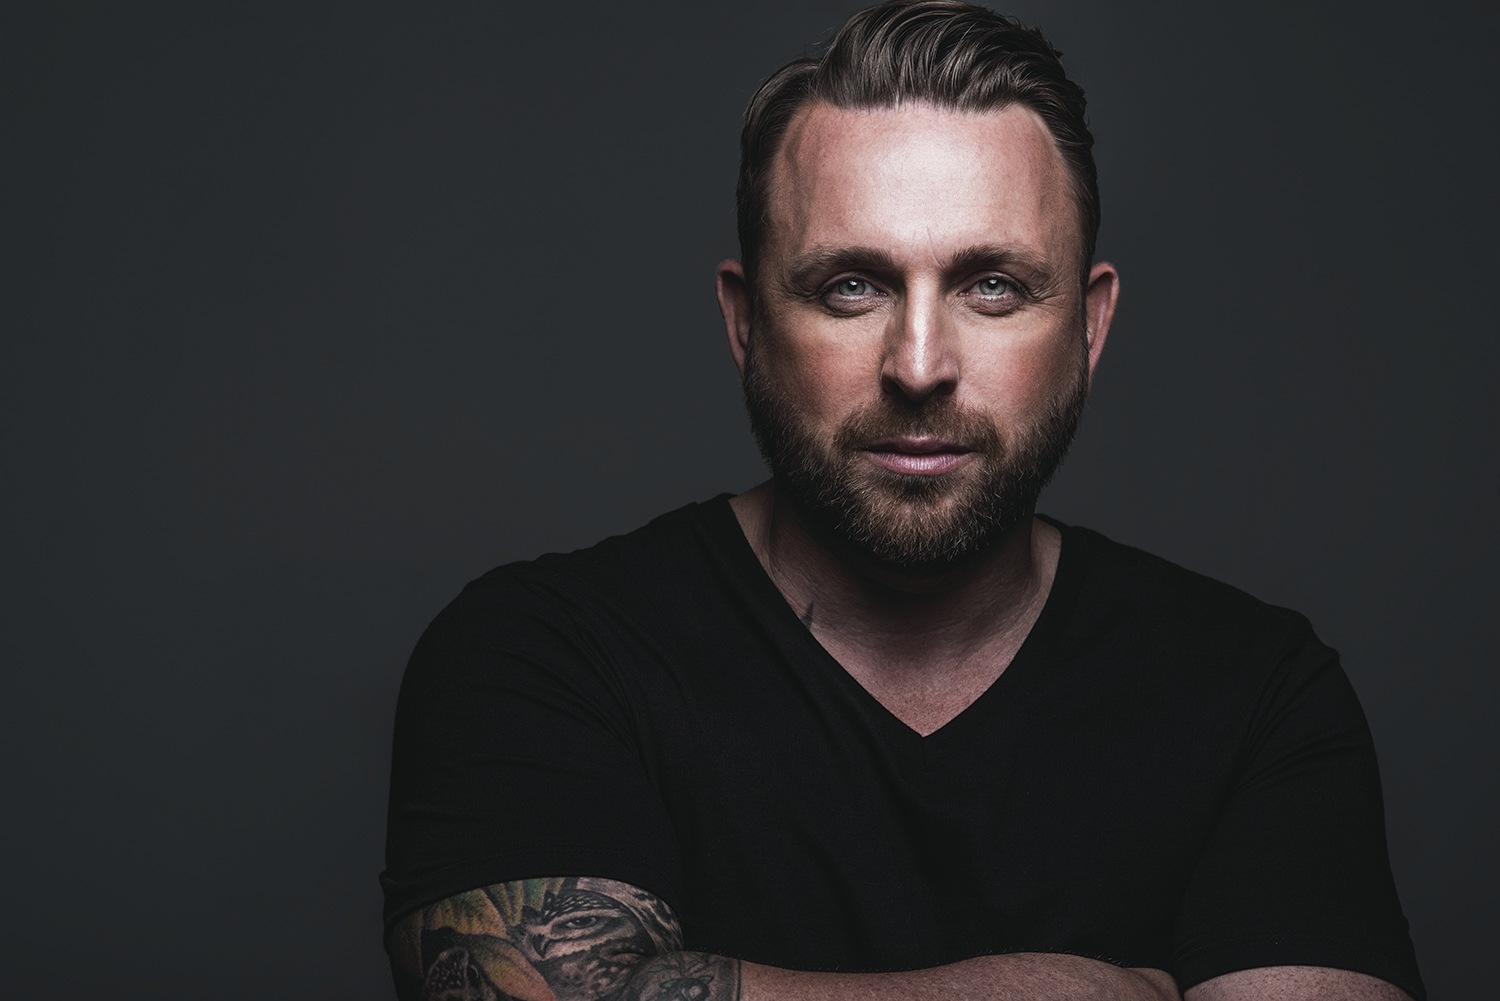 ON THE ROAD - Award-winning singer-songwriter Johnny Reid is bringing his ‘What Love is All About’ tour to the Centrium on March 5th.